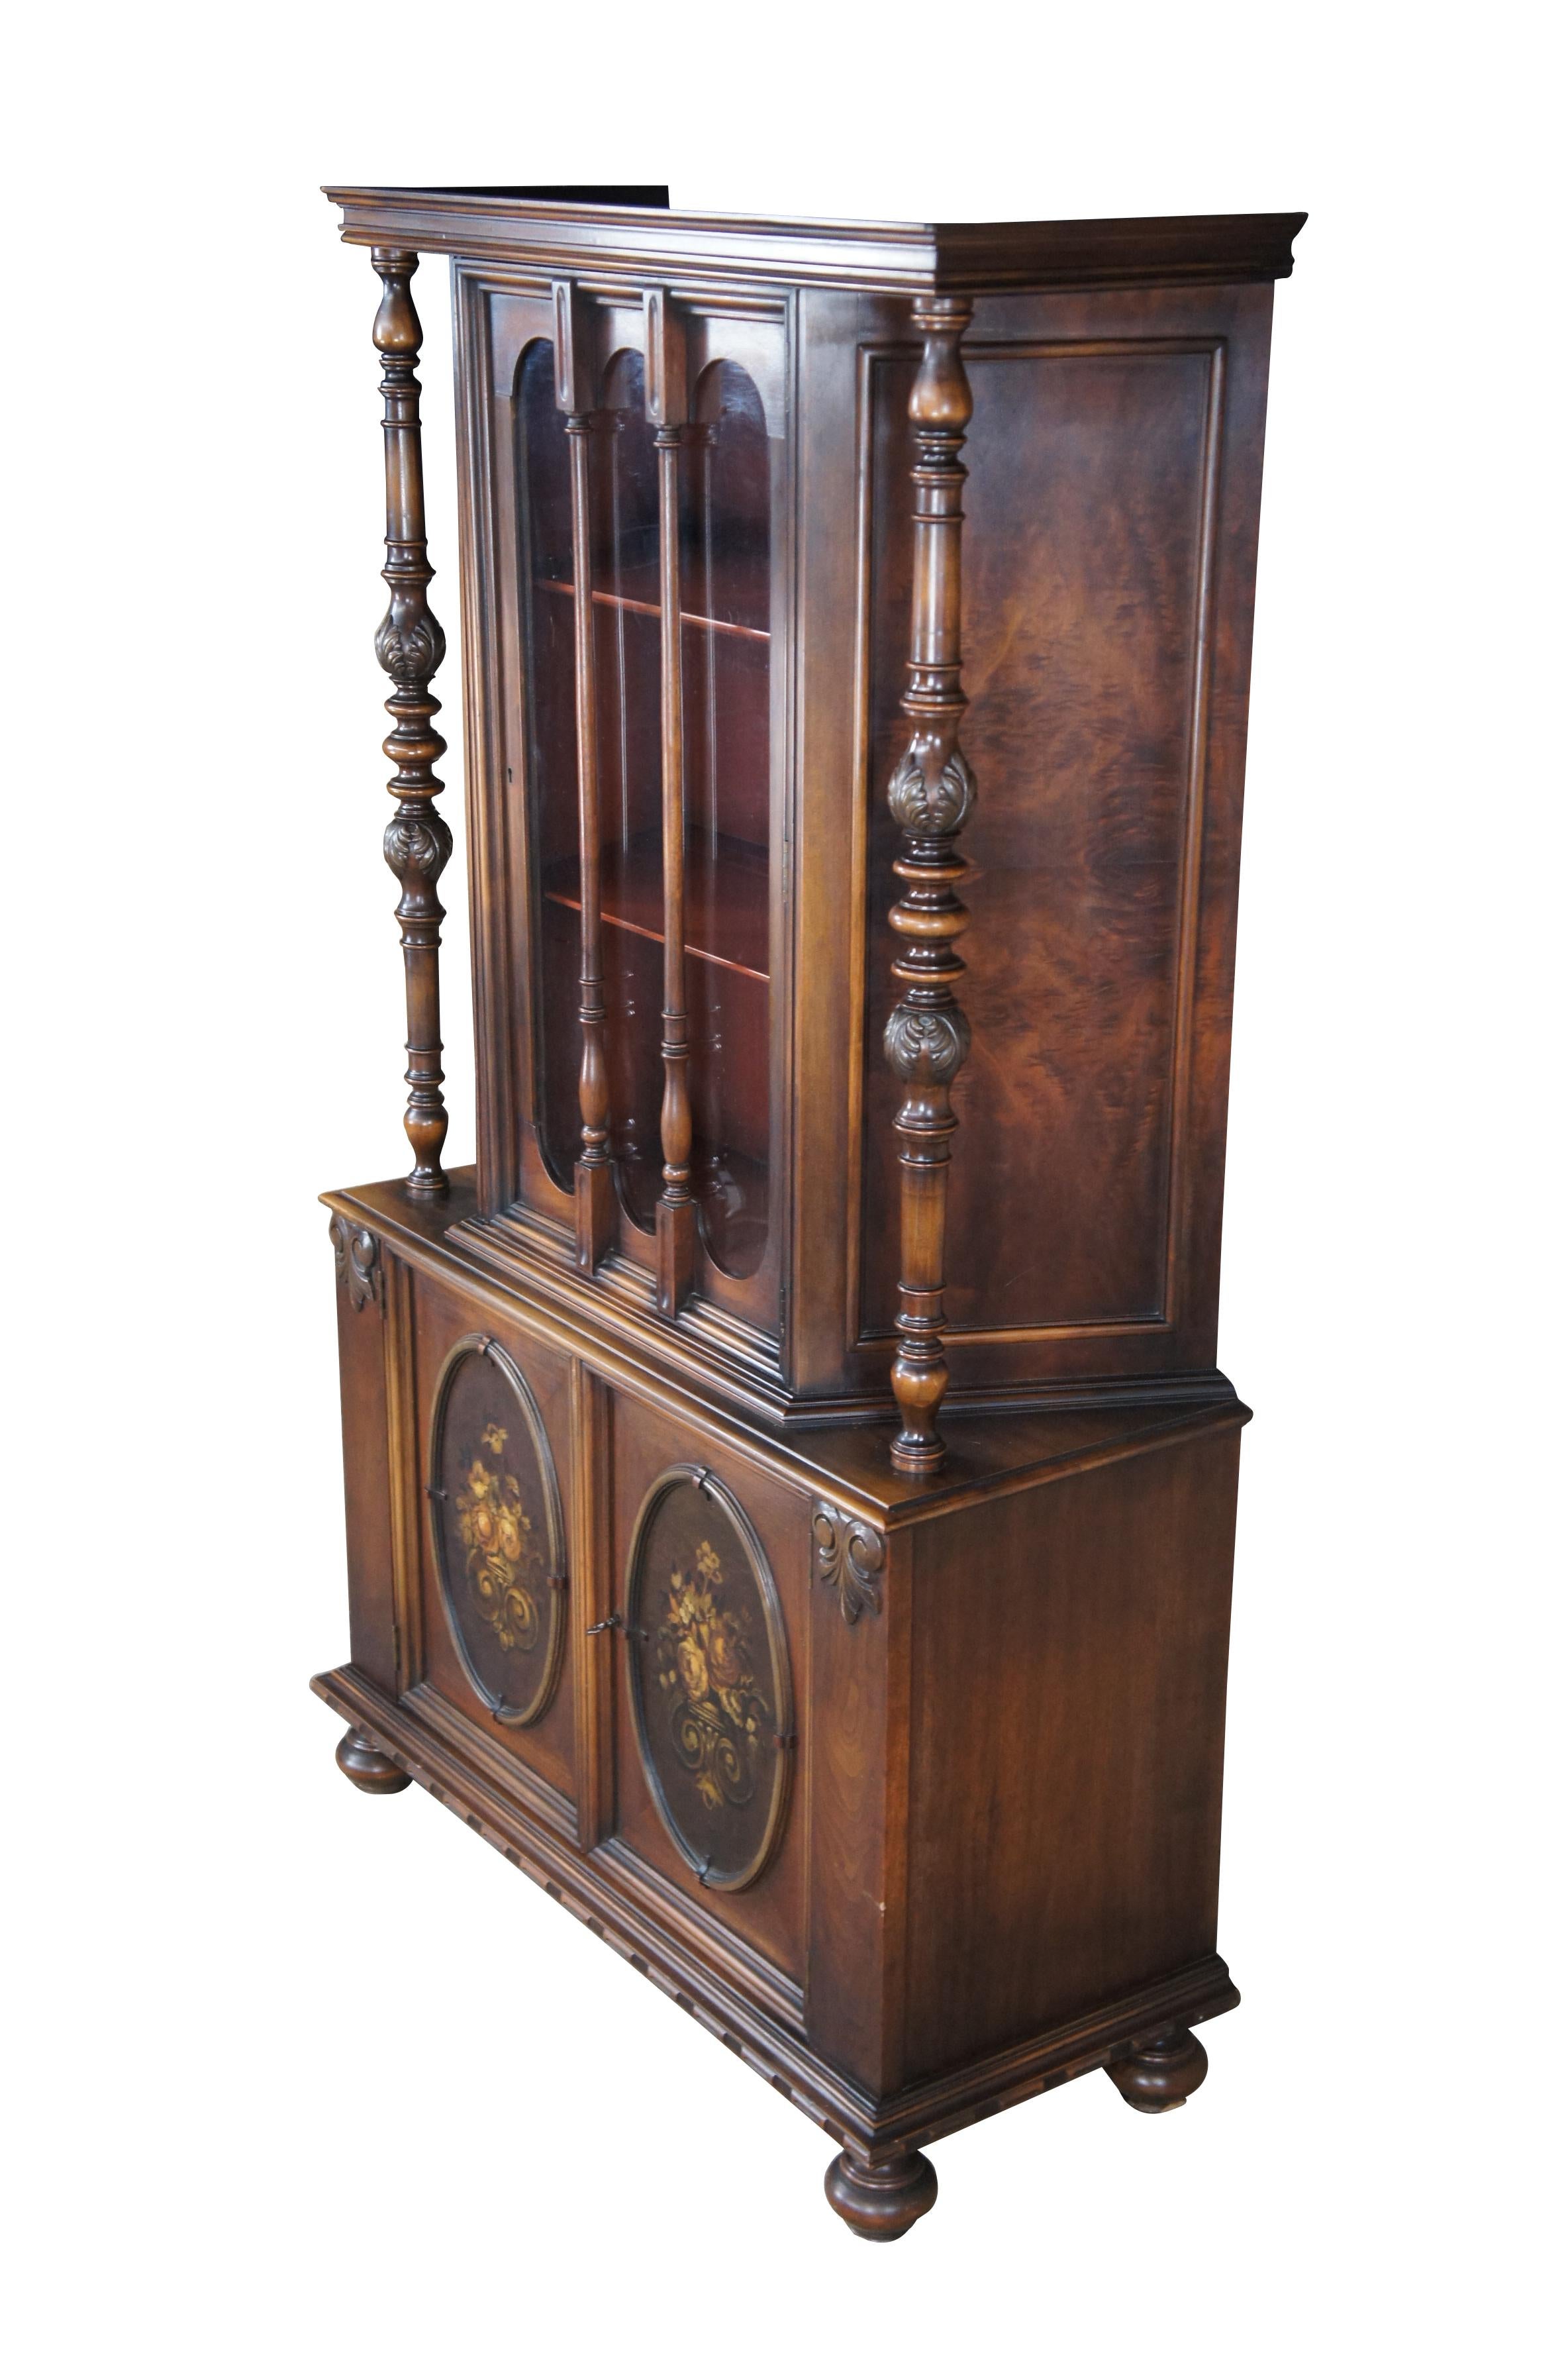 Antique Life Time Furniture china cabinet / hutch.  Made of walnut featuring Jacobean styling with hand turned supports with acanthus carvings.  The curio cabinet features red painted interior with arcade form door and turned spindle coverings.  The